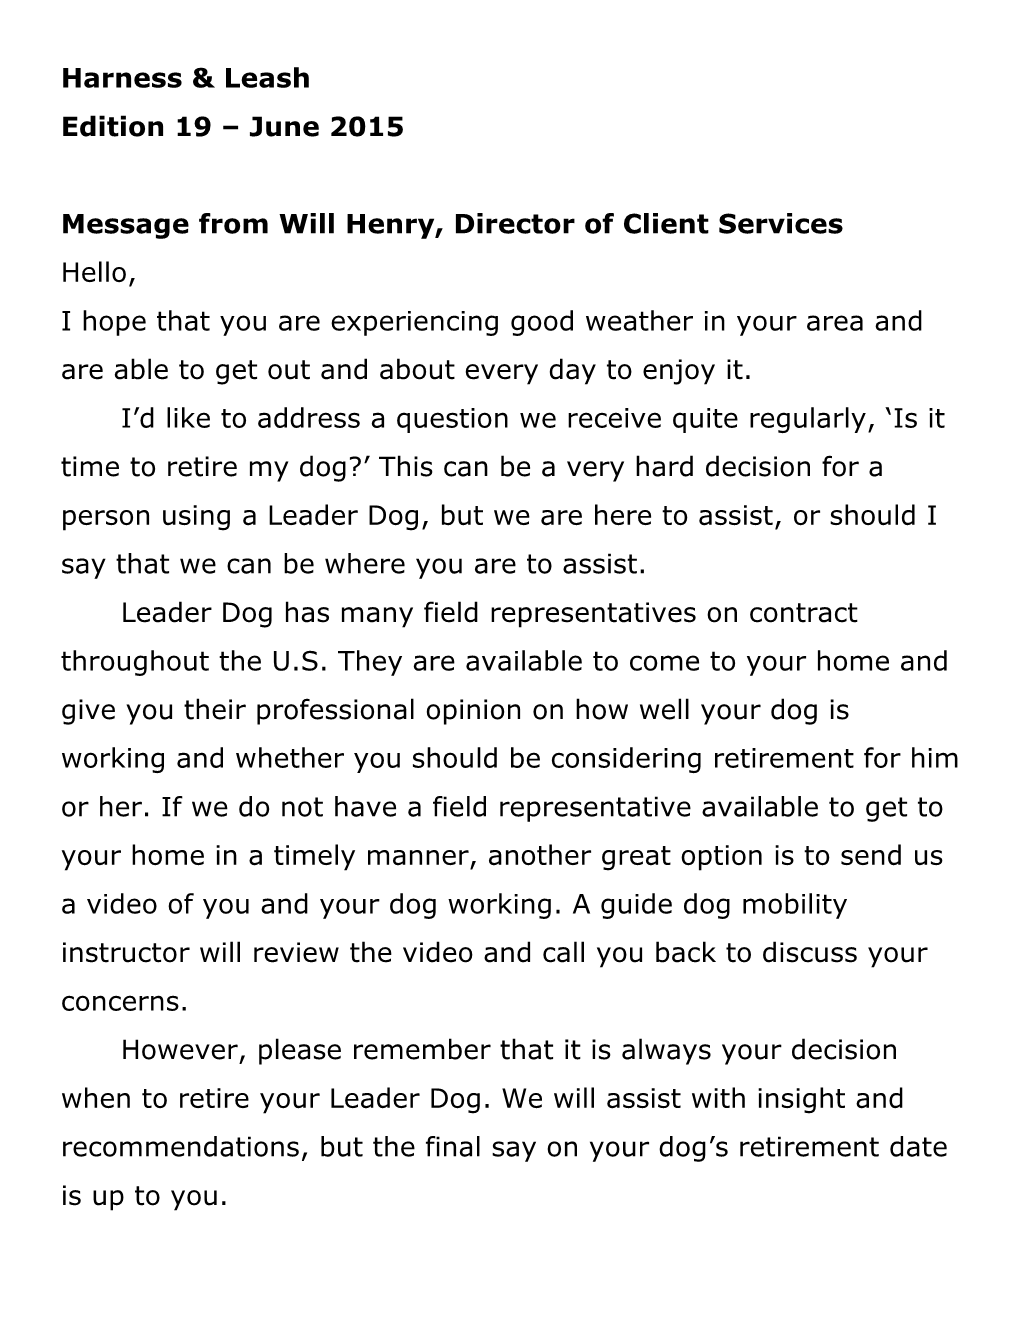 Message from Will Henry, Director of Client Services